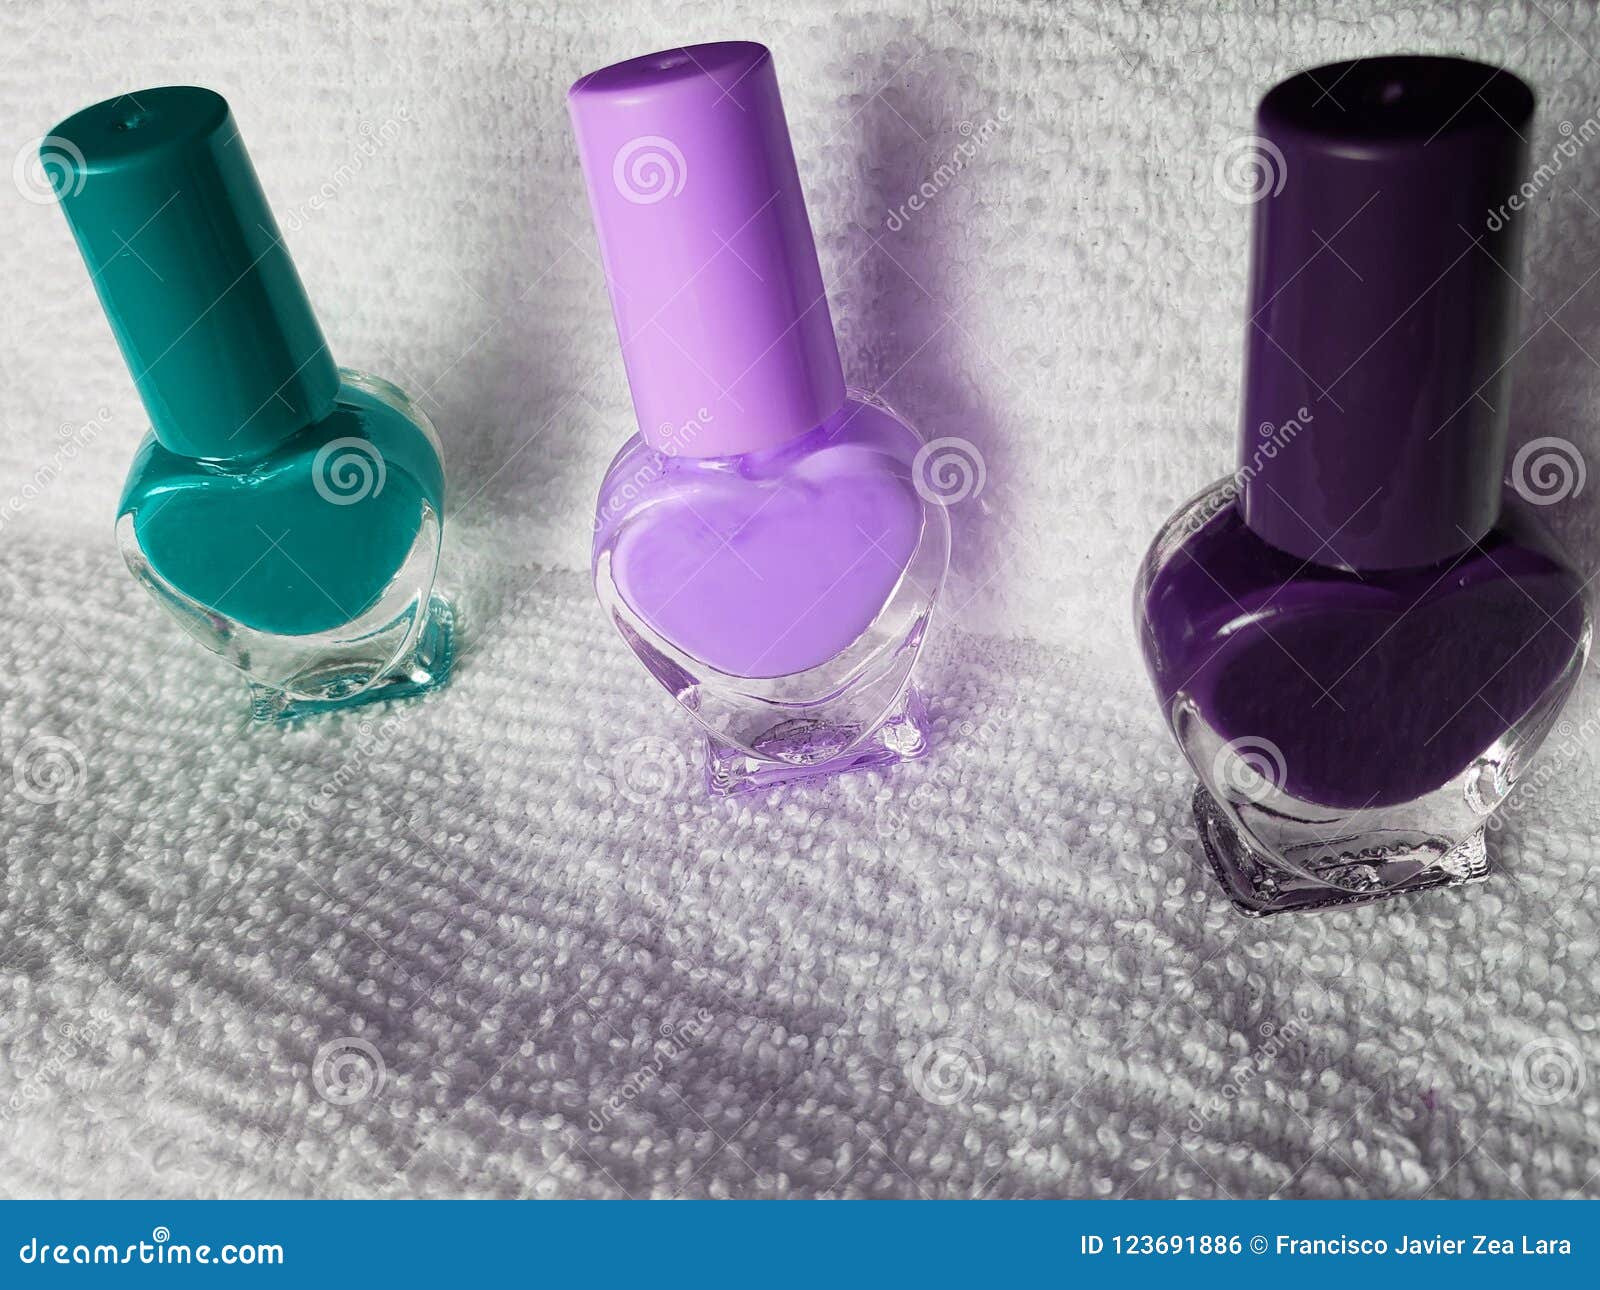 bottles with nail polish in aquamarine, pink and purple, with white background towel